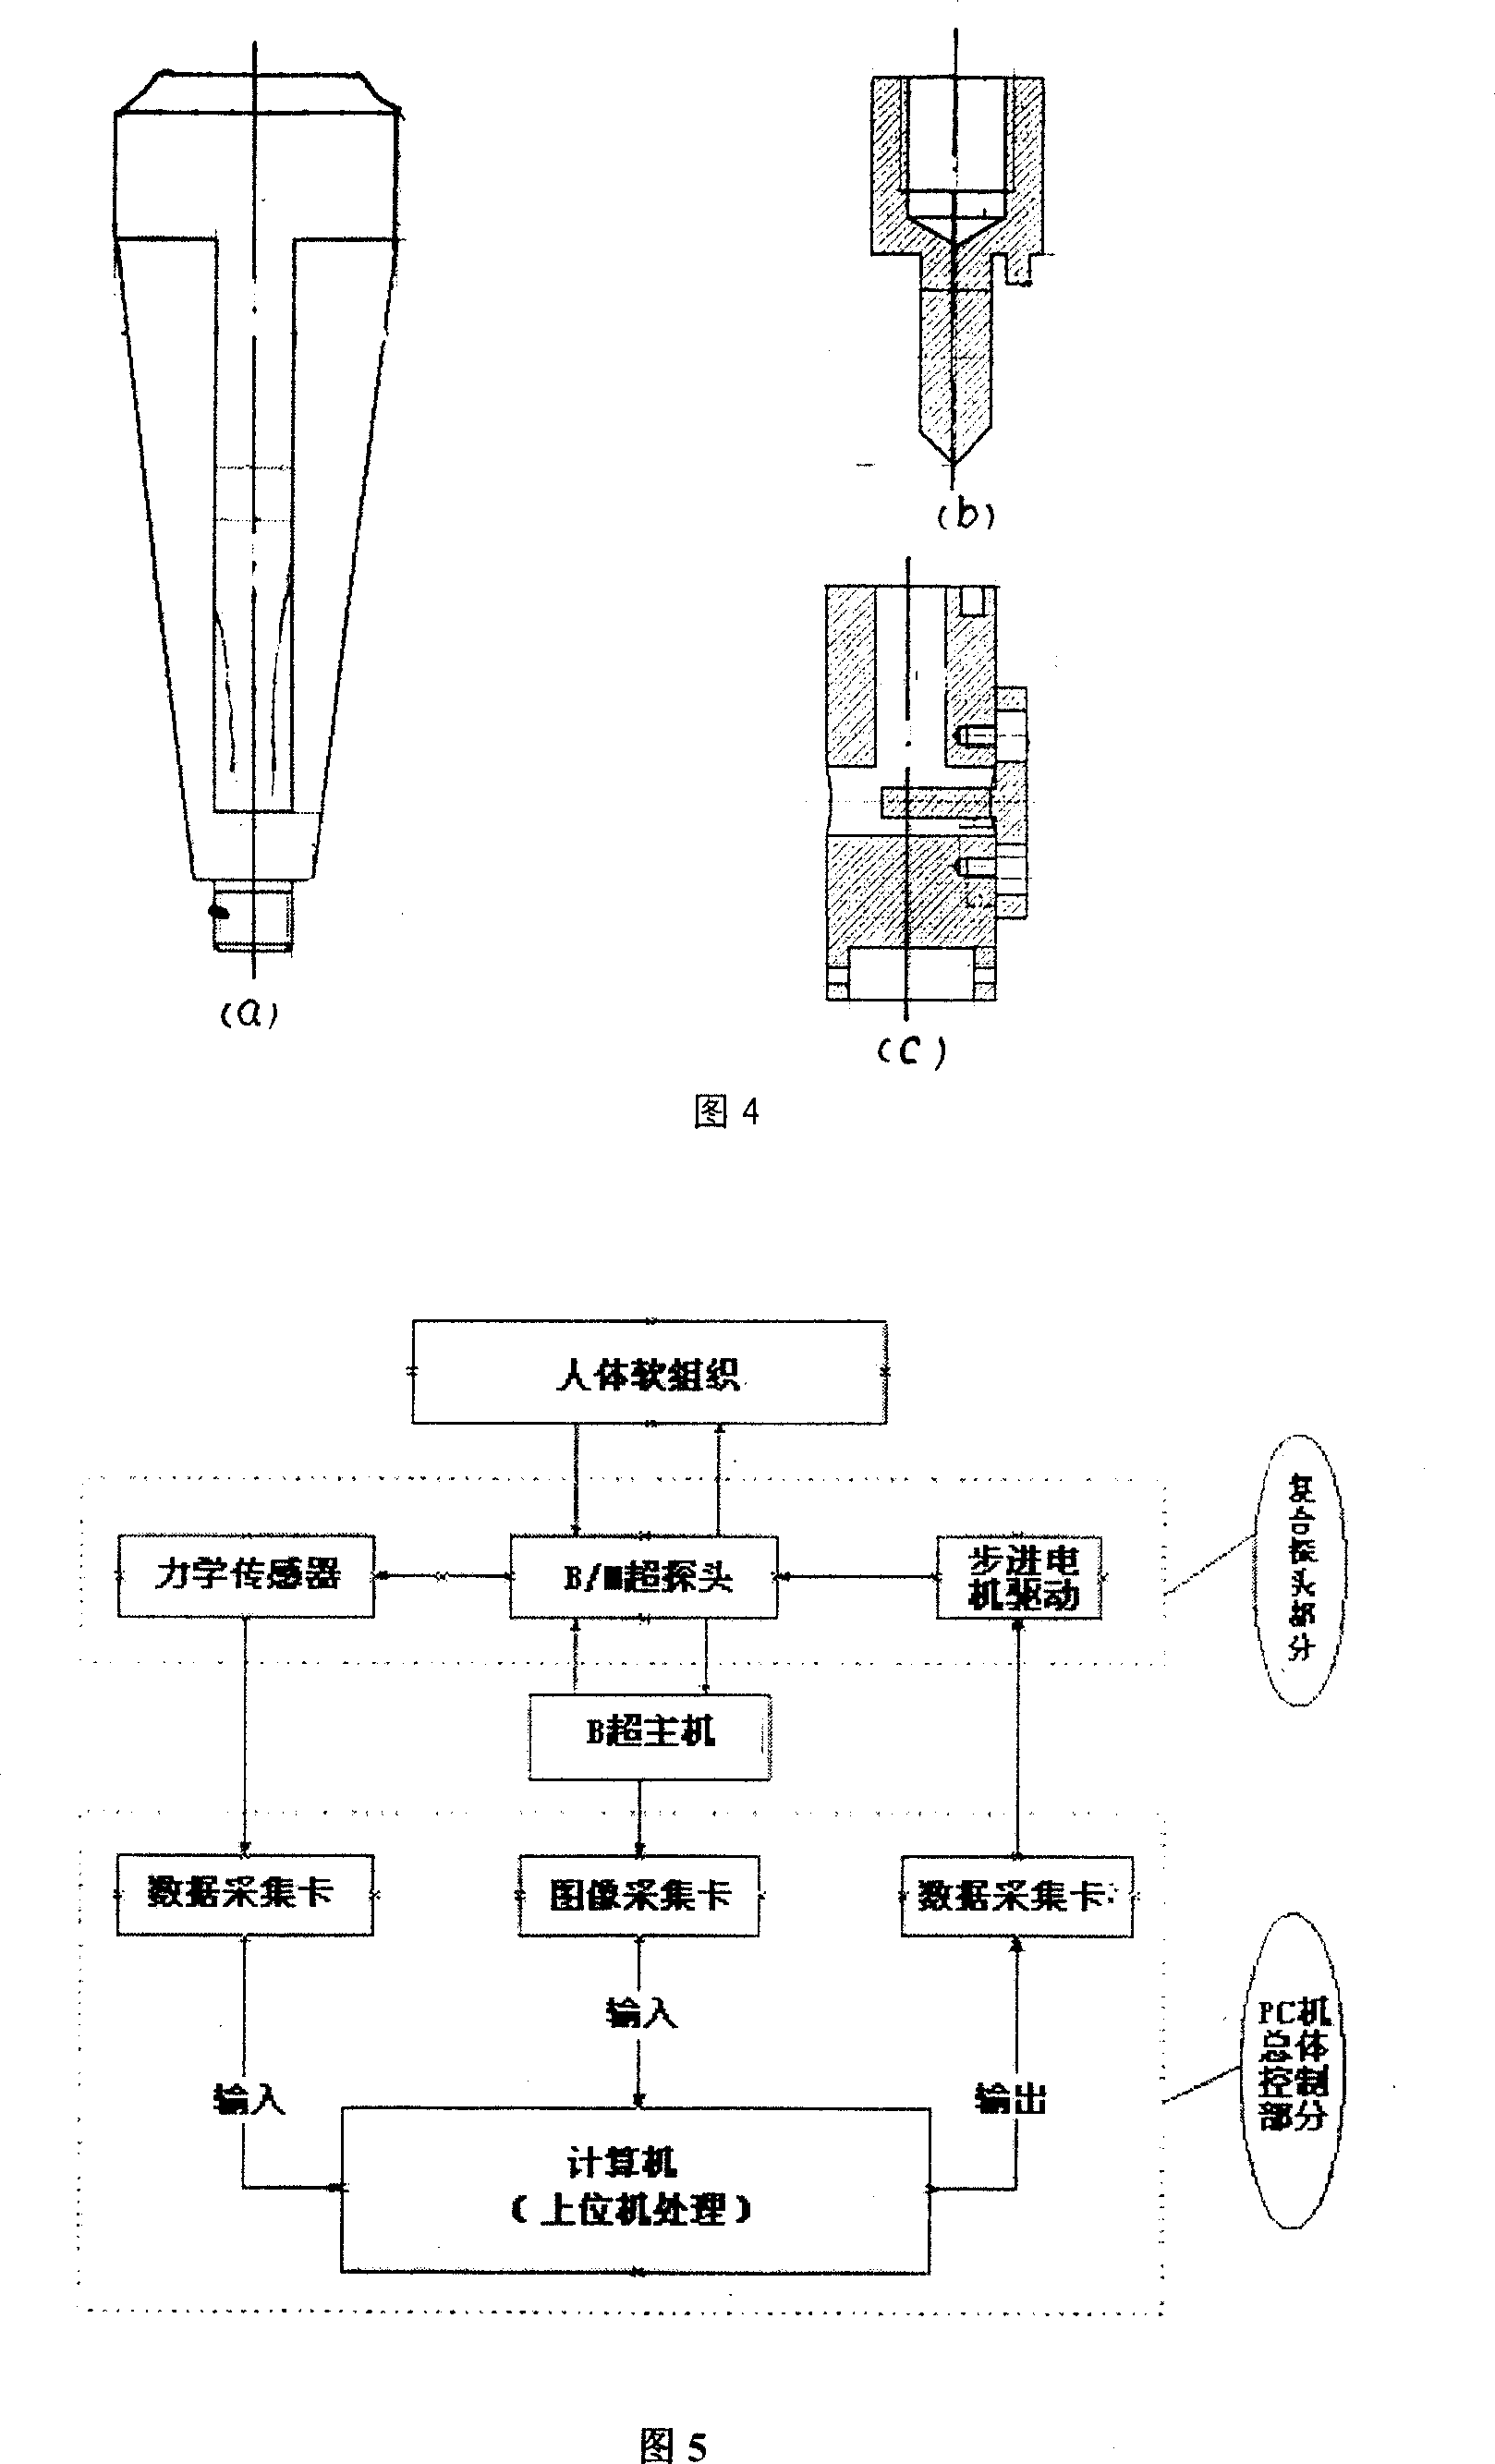 Integral soft tissue dynamic load response parameter collection system